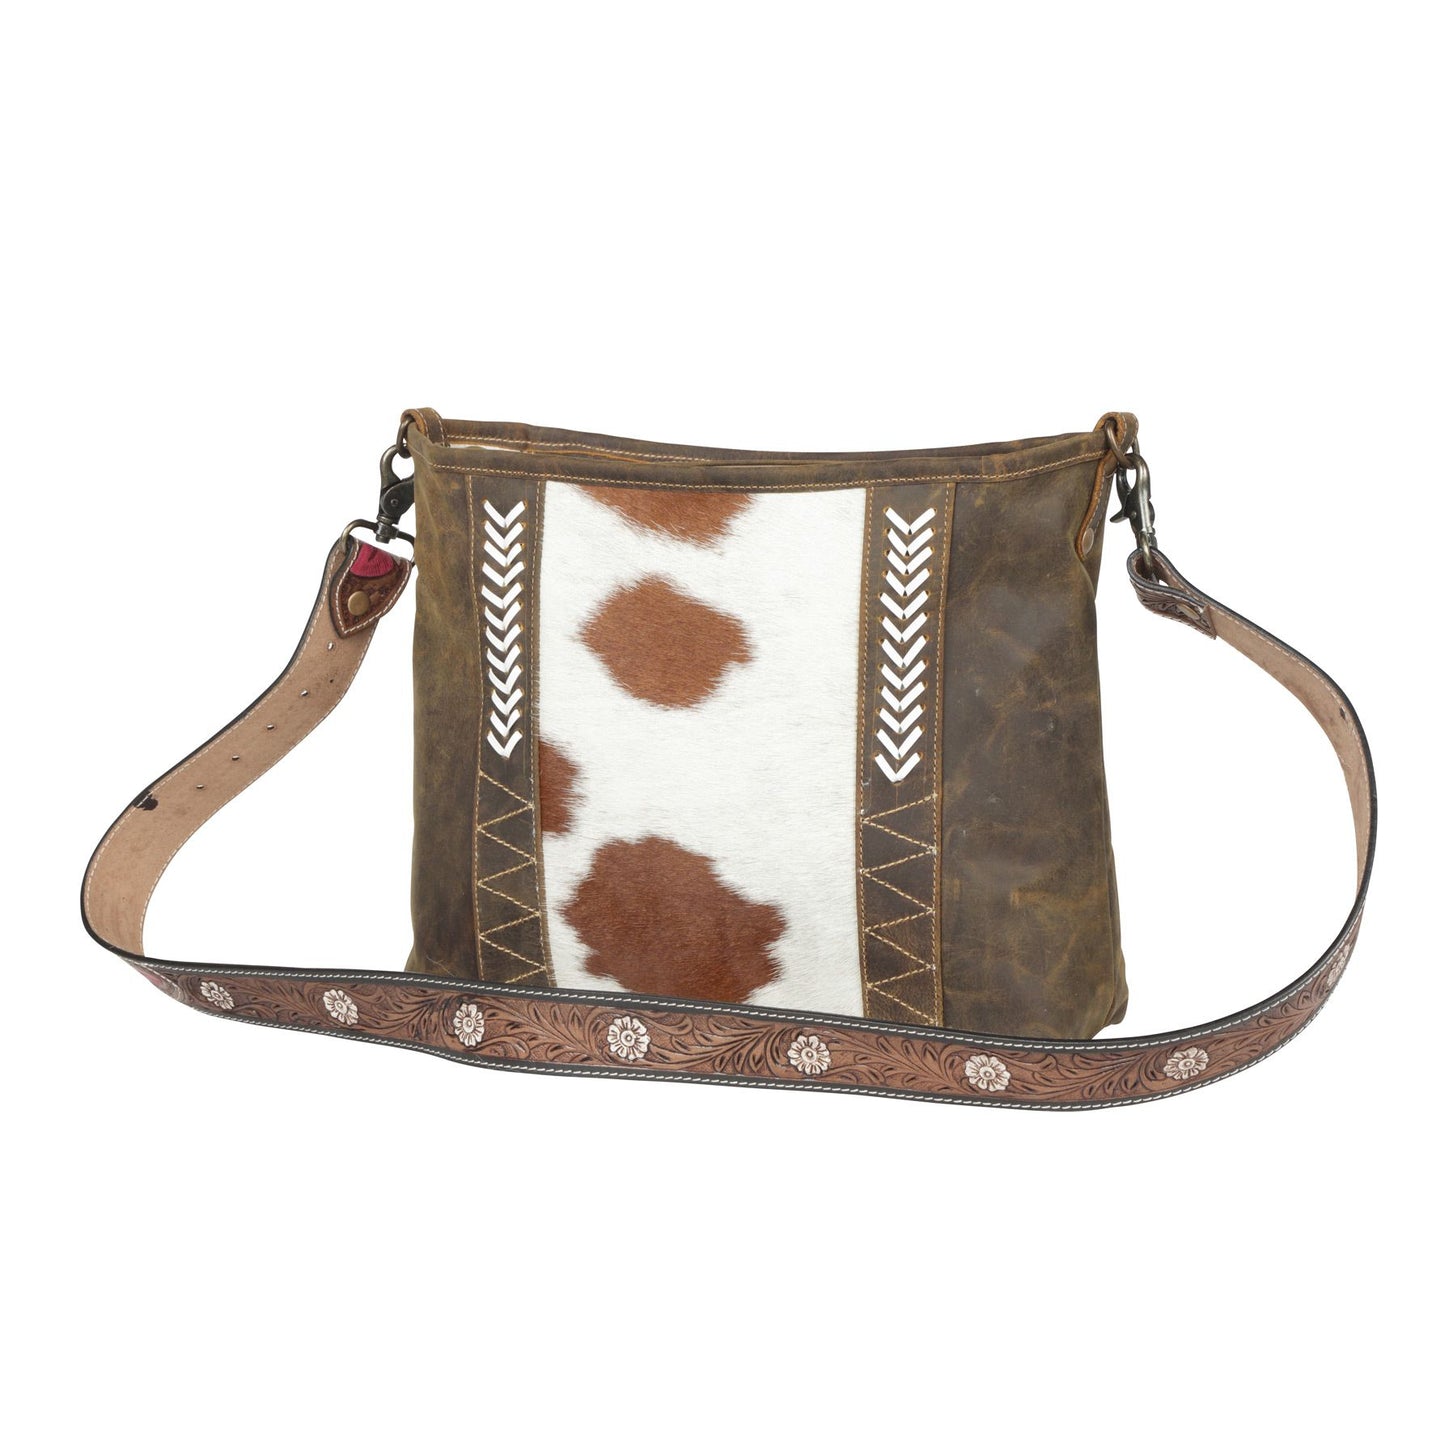 Follow The Herd Leather/Hair-On-Hide Purse